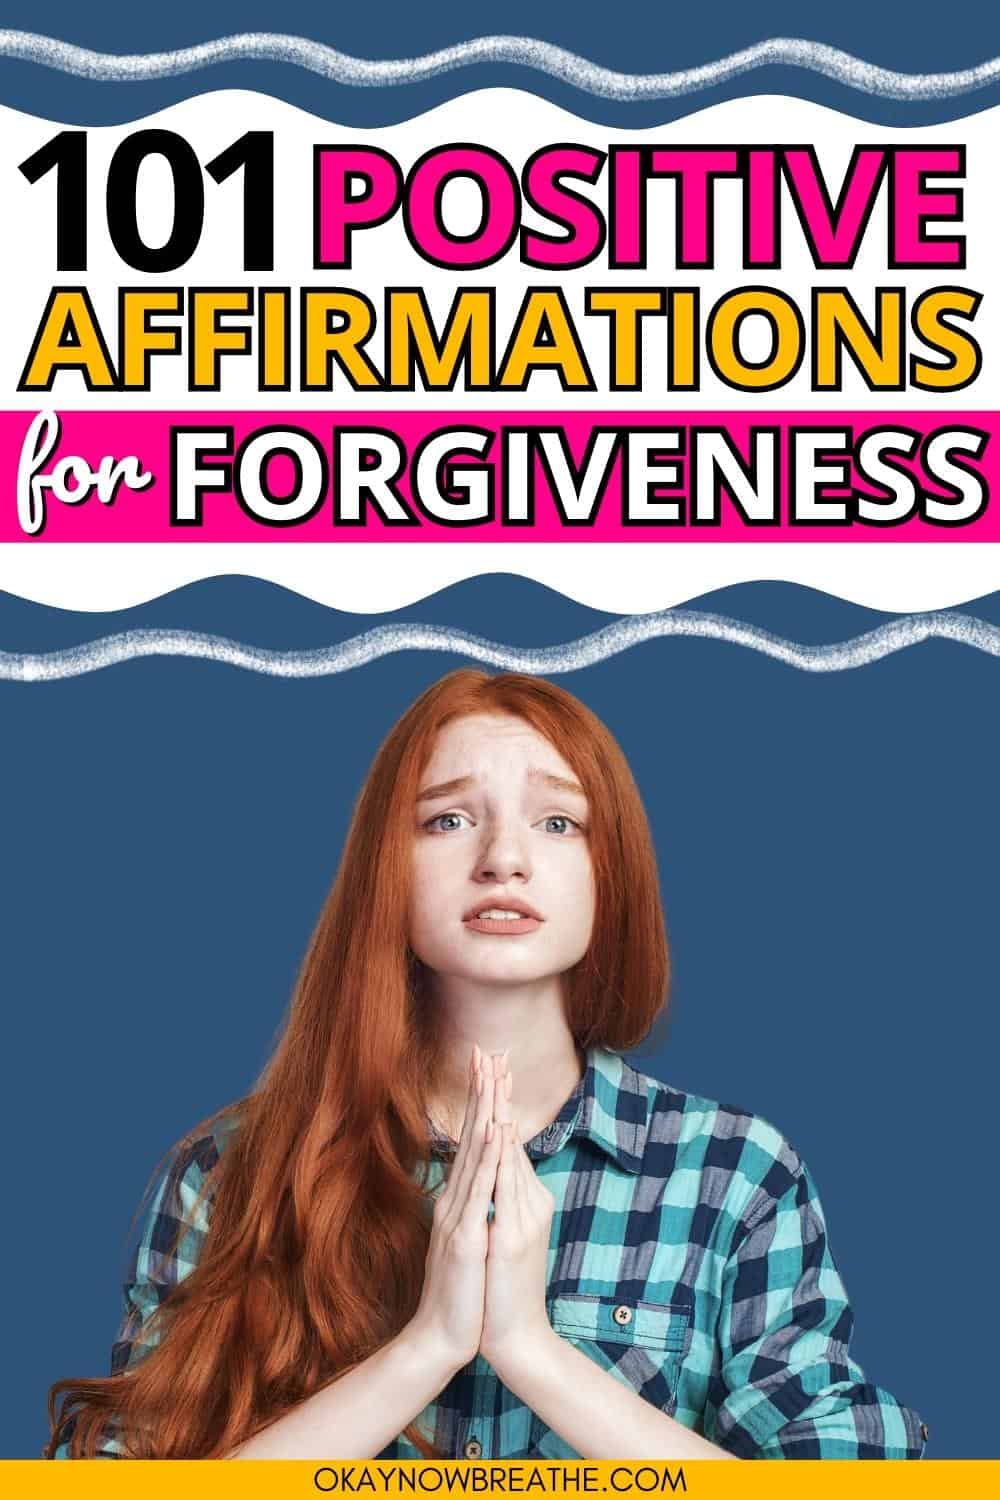 There is a redhead female with her hands in prayer looking at camera. Above, there is text: 101 positive affirmations for forgiveness